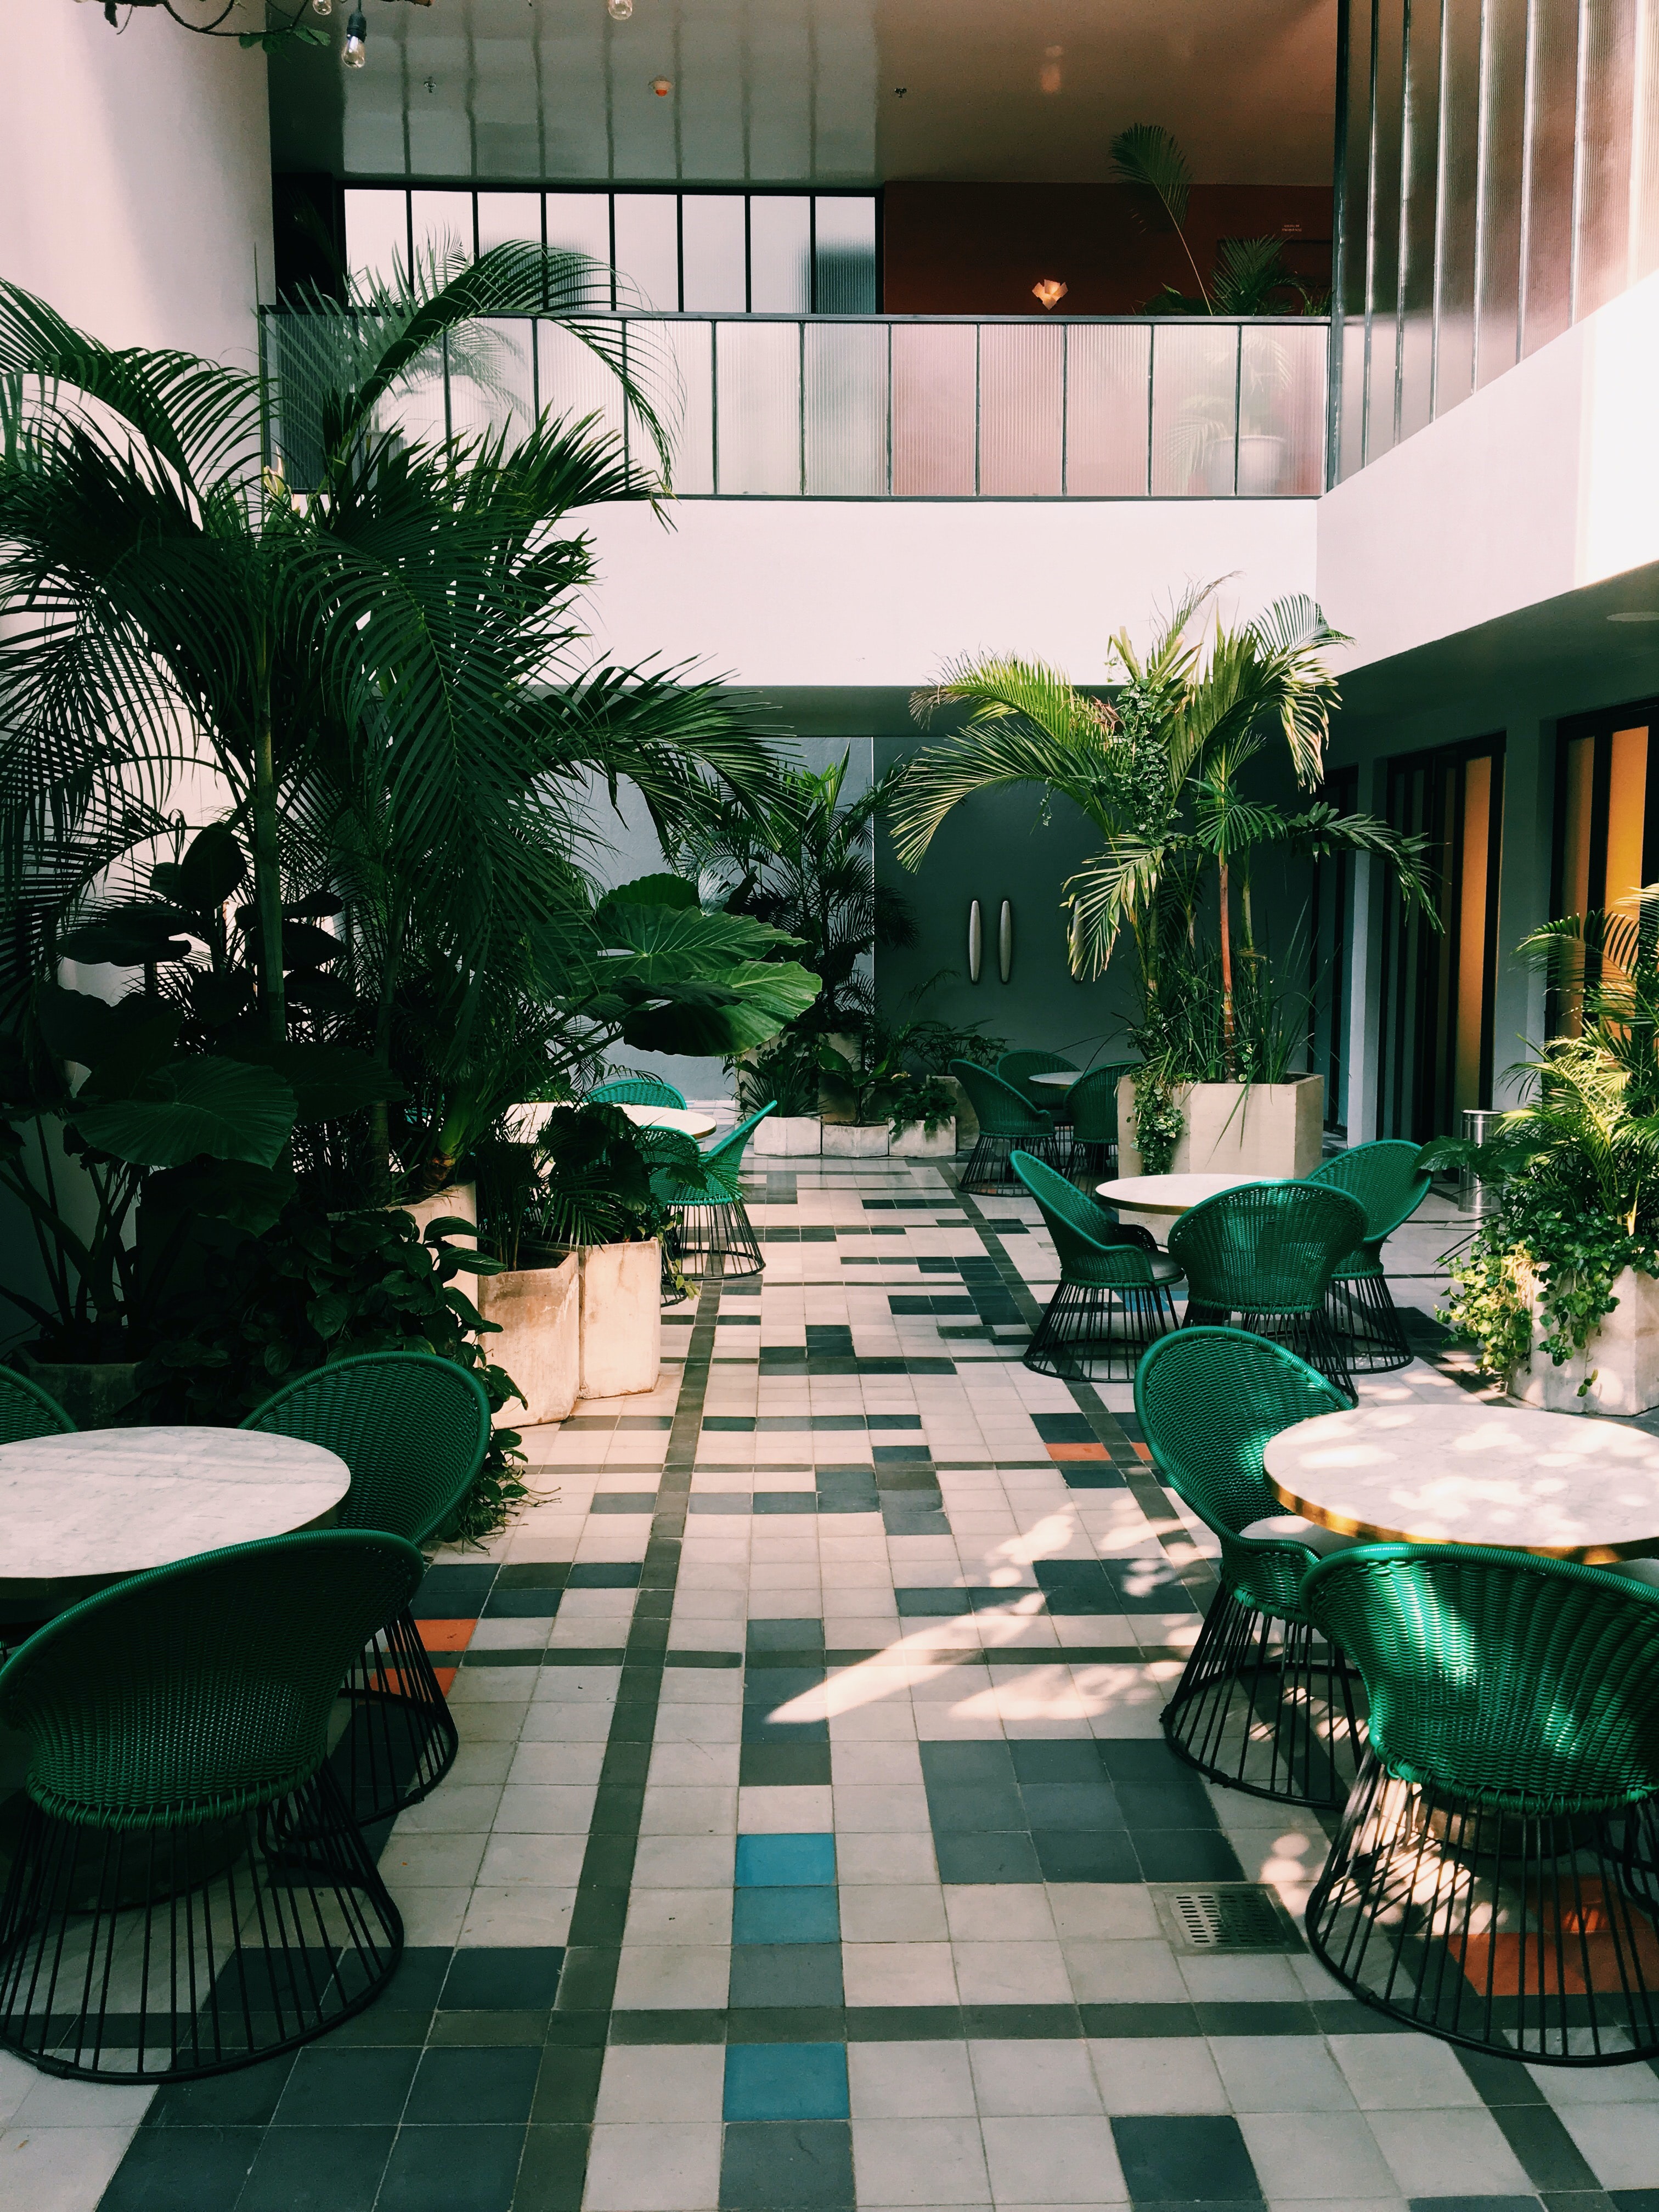 Hotel Lobby with Plants and Green and White Tiles